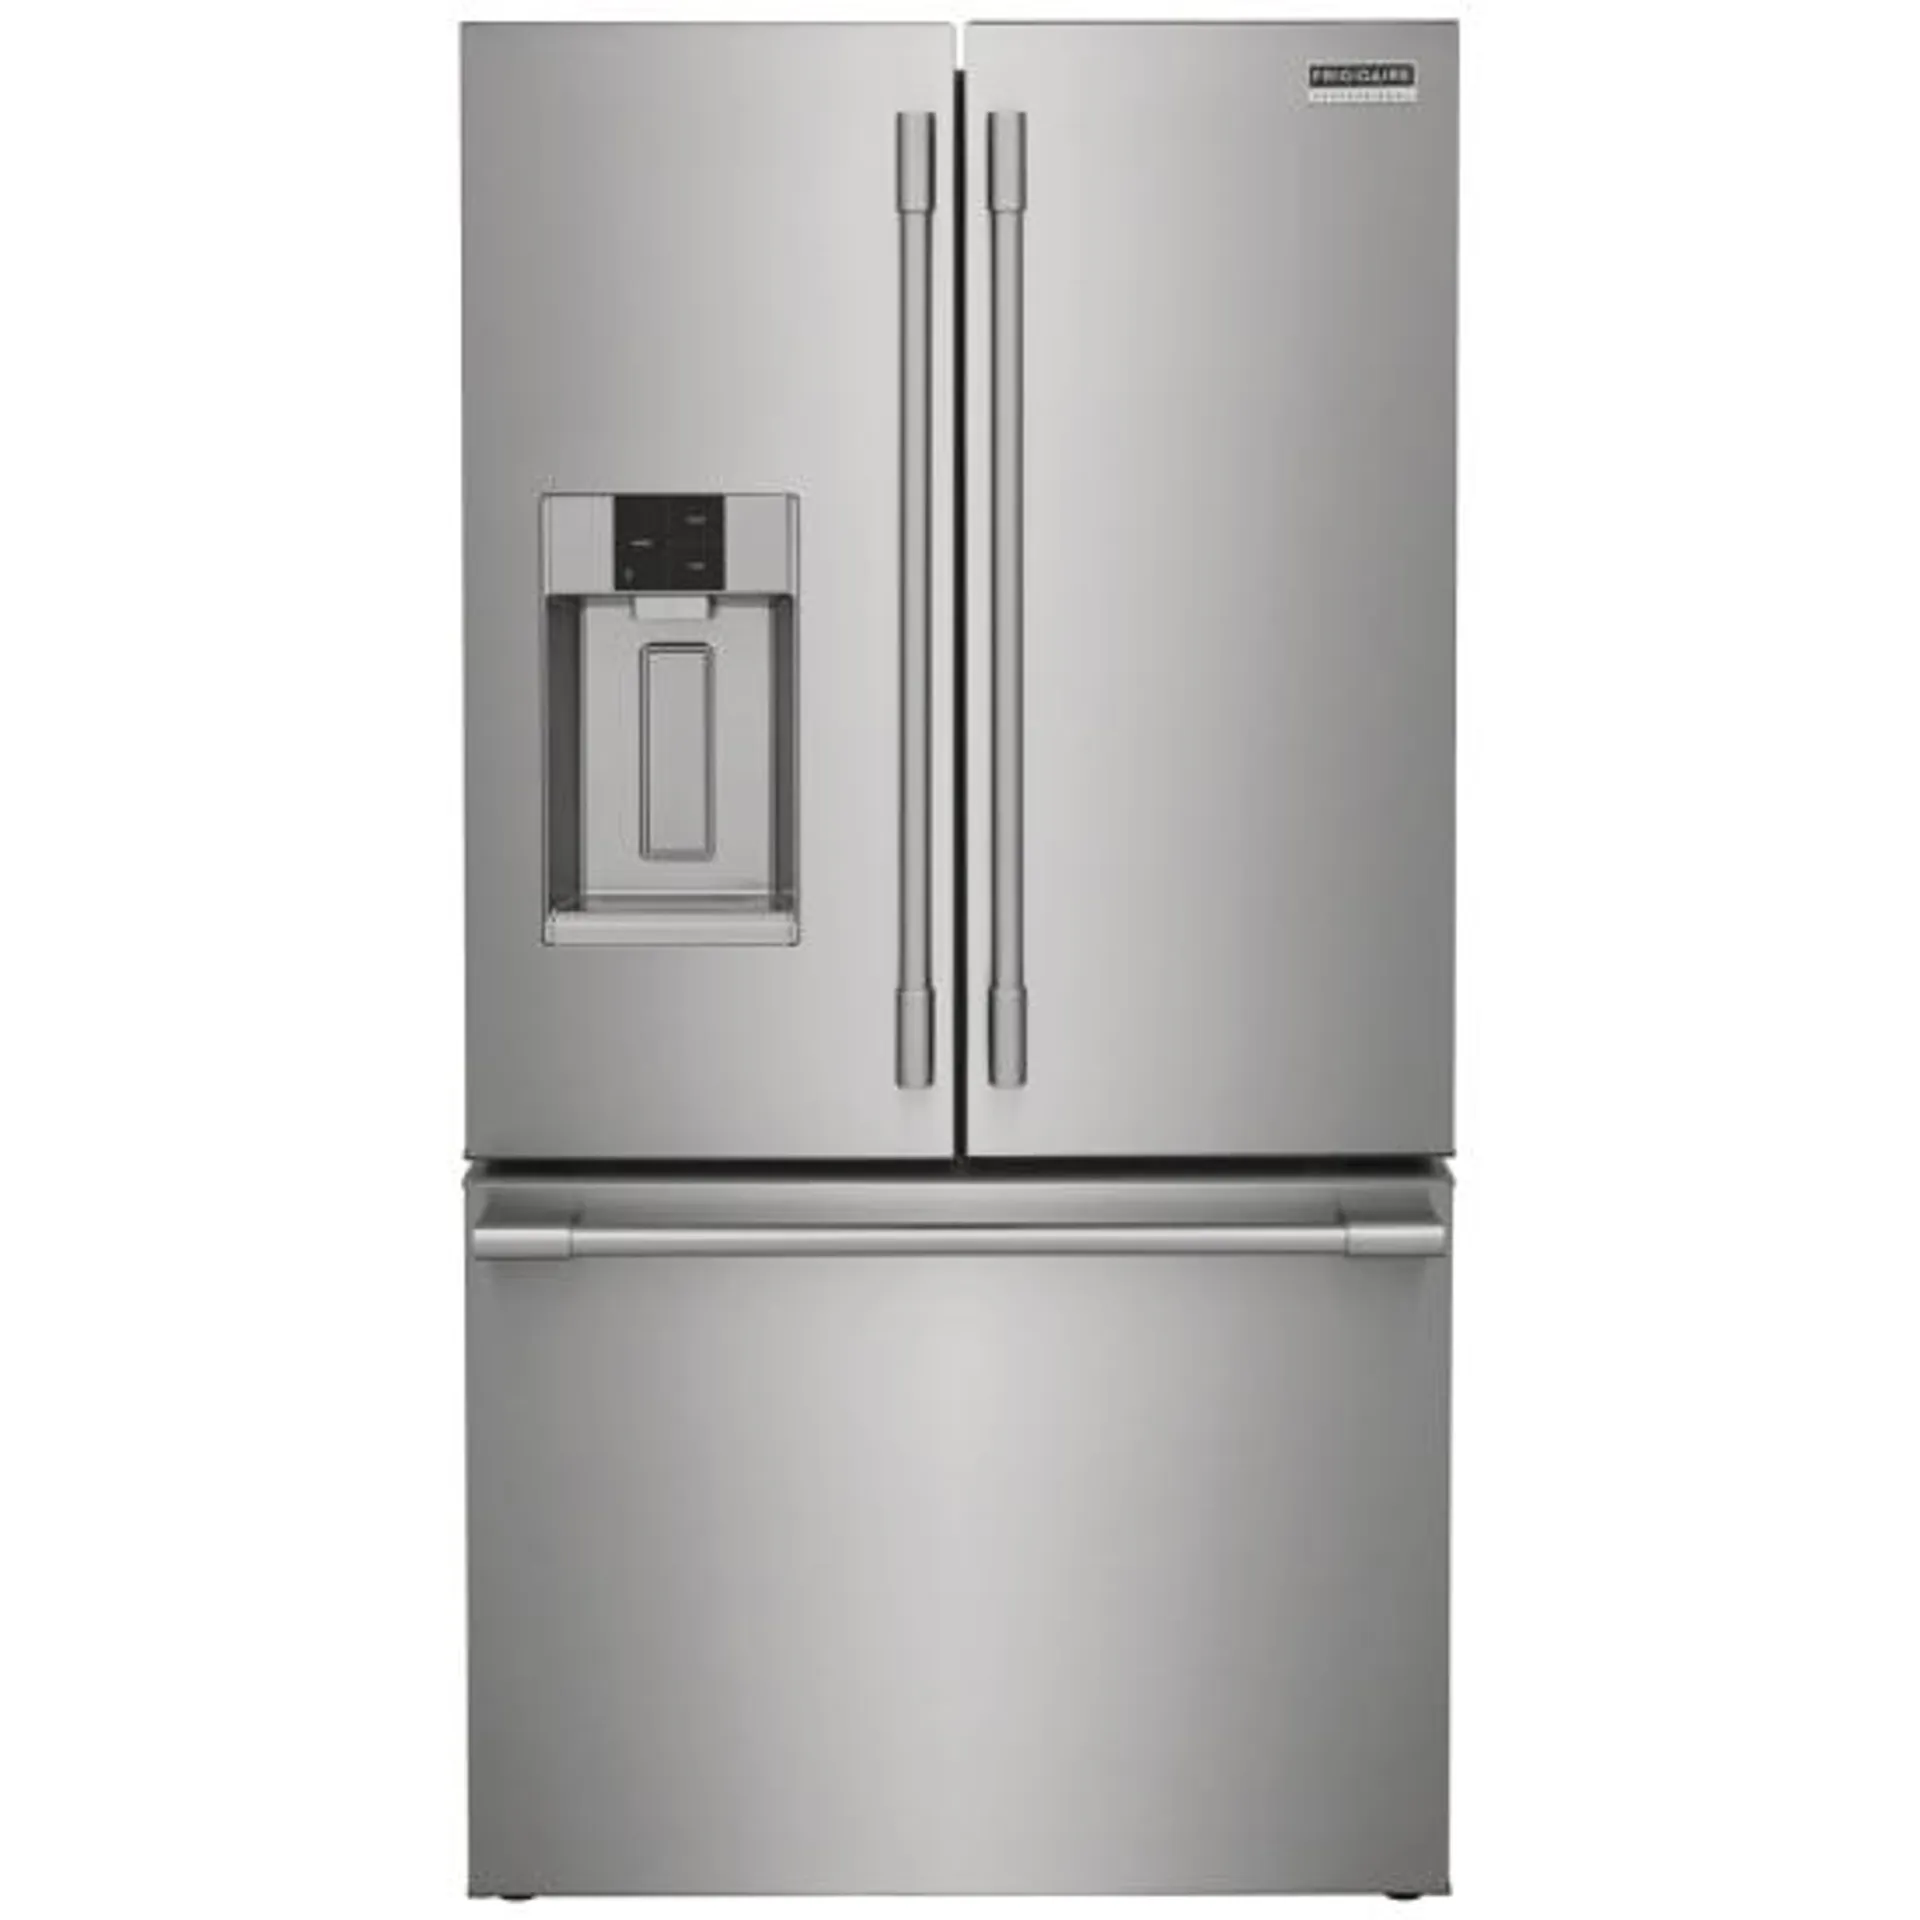 Frigidaire Professional PRFC2383AF French Door Refrigerator, 36 inch Width, ENERGY STAR Certified, Counter Depth, 22.6 cu. ft. Capacity, Stainless Steel colour Freezer Located Ice Dispenser filter